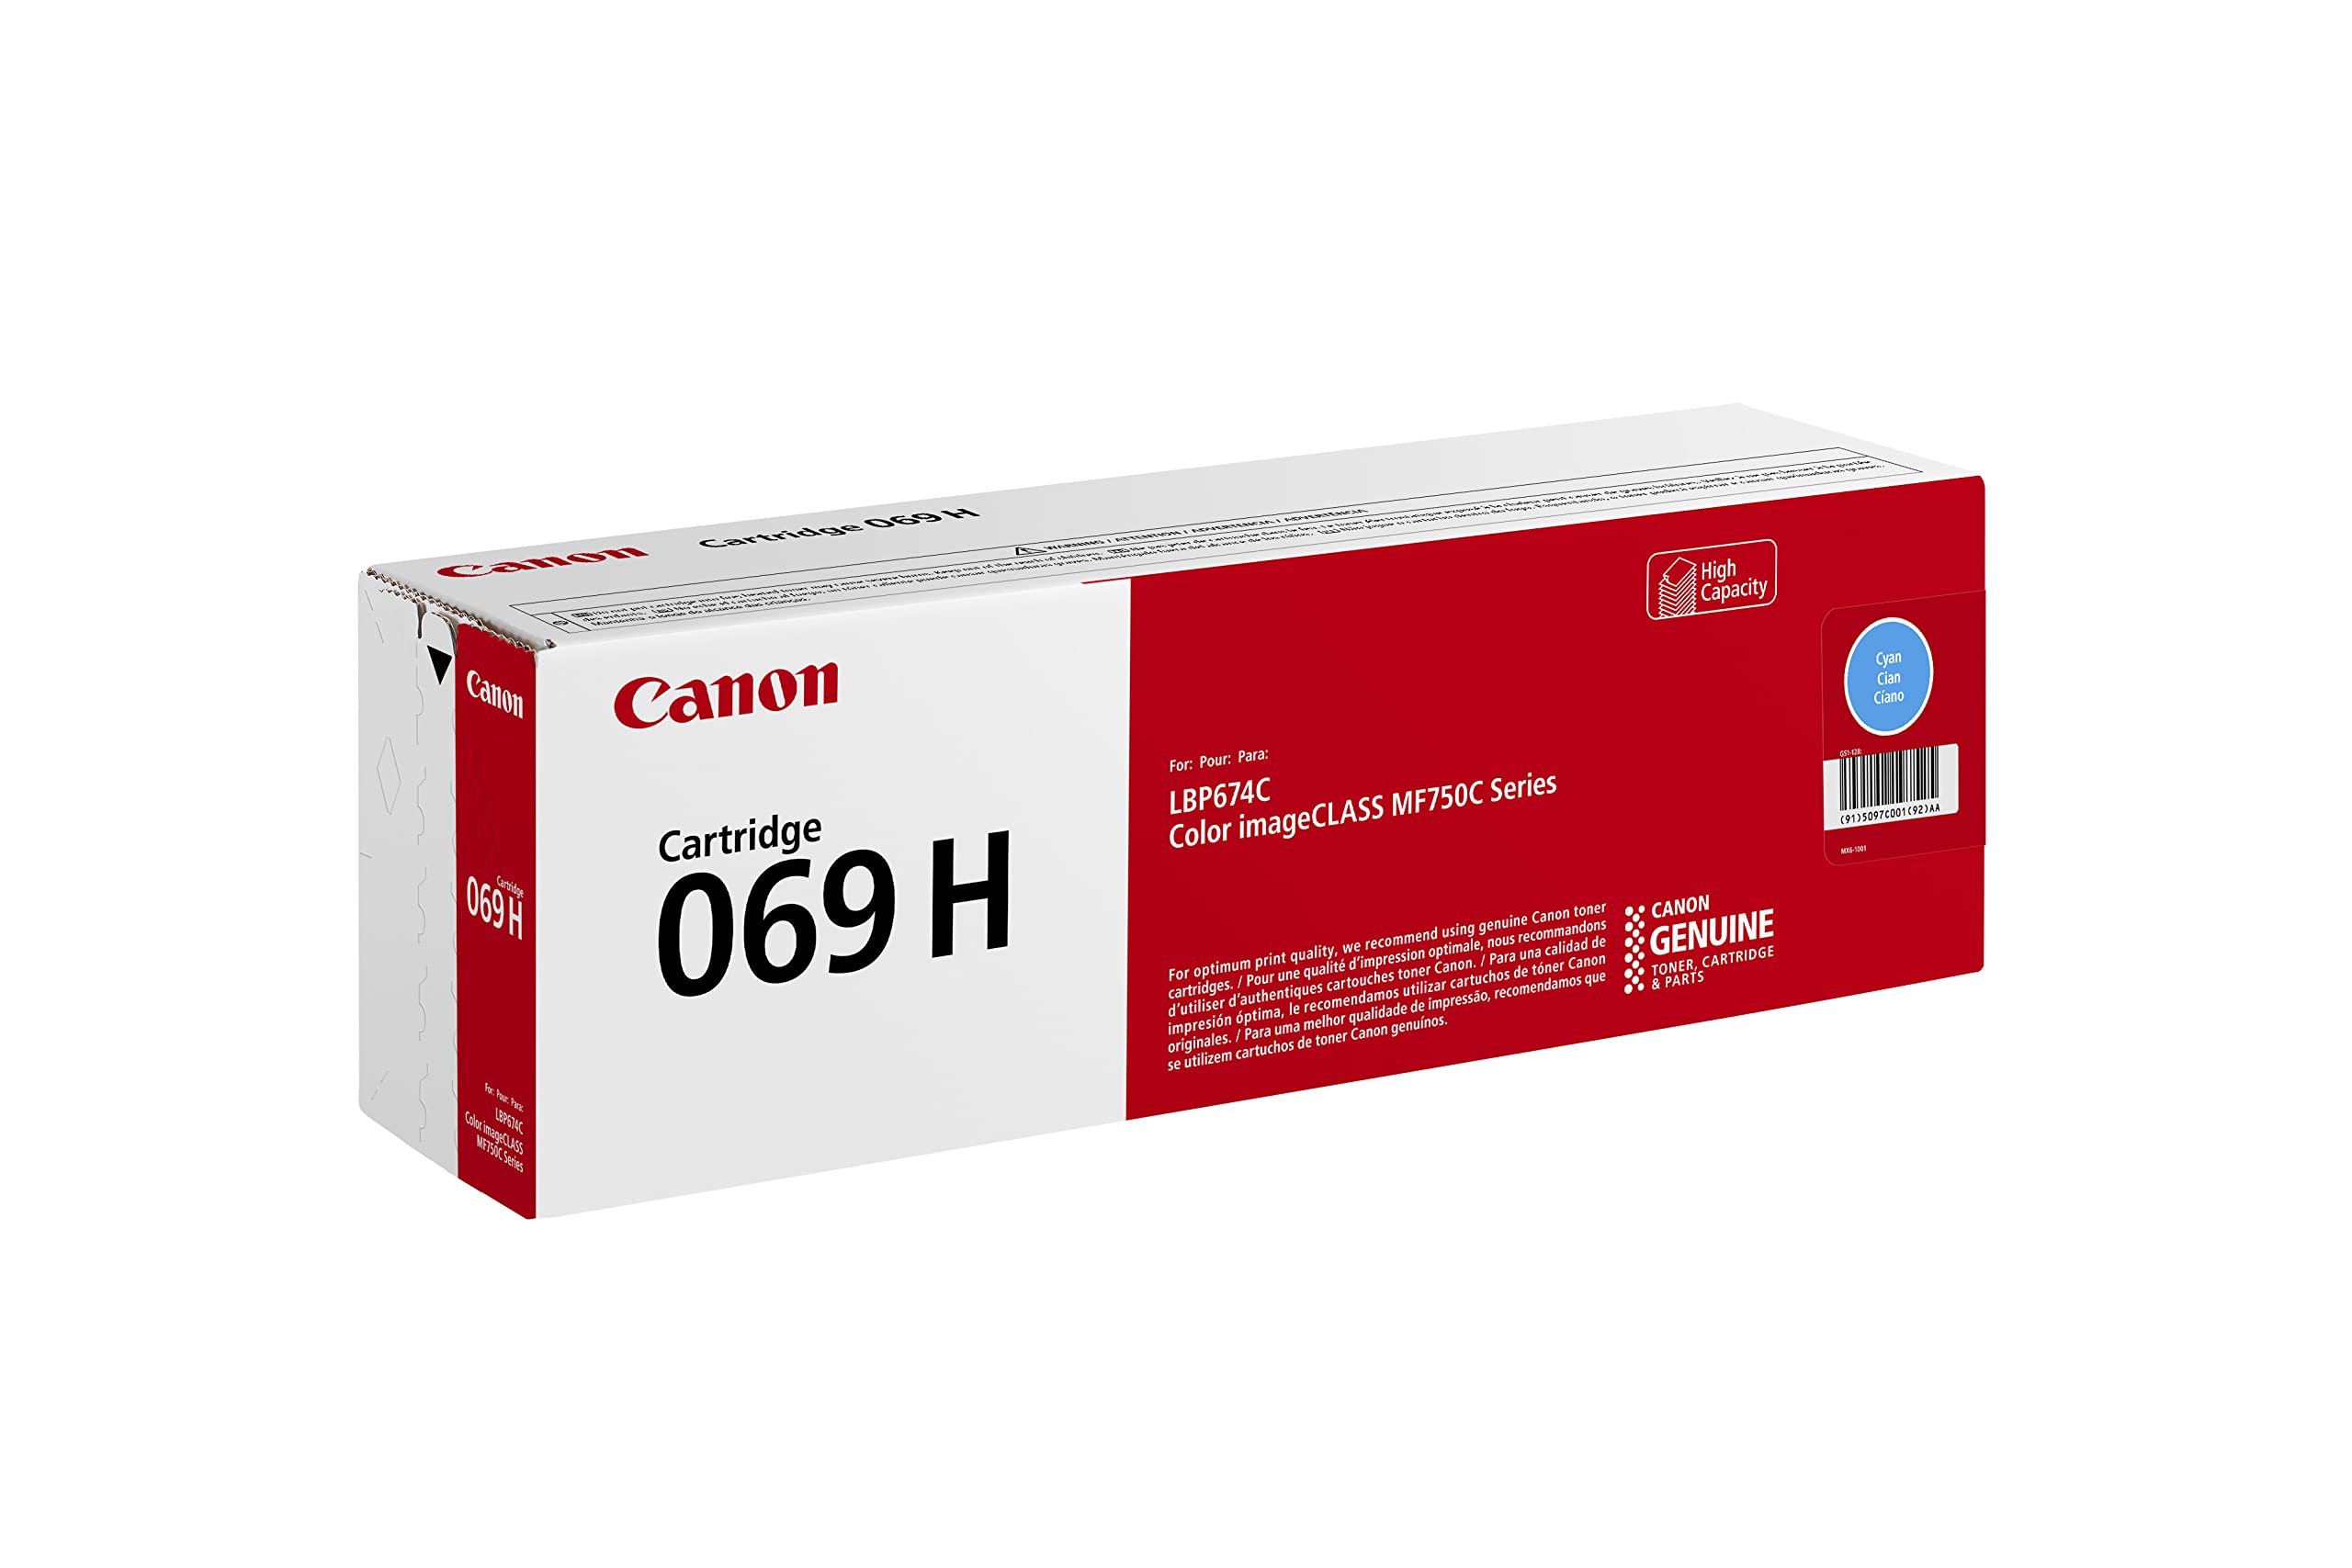 Canon 069 Cyan Toner Cartridge, High Capacity, Compatible to MF753Cdw, MF751Cdw and LBP674Cdw Printers